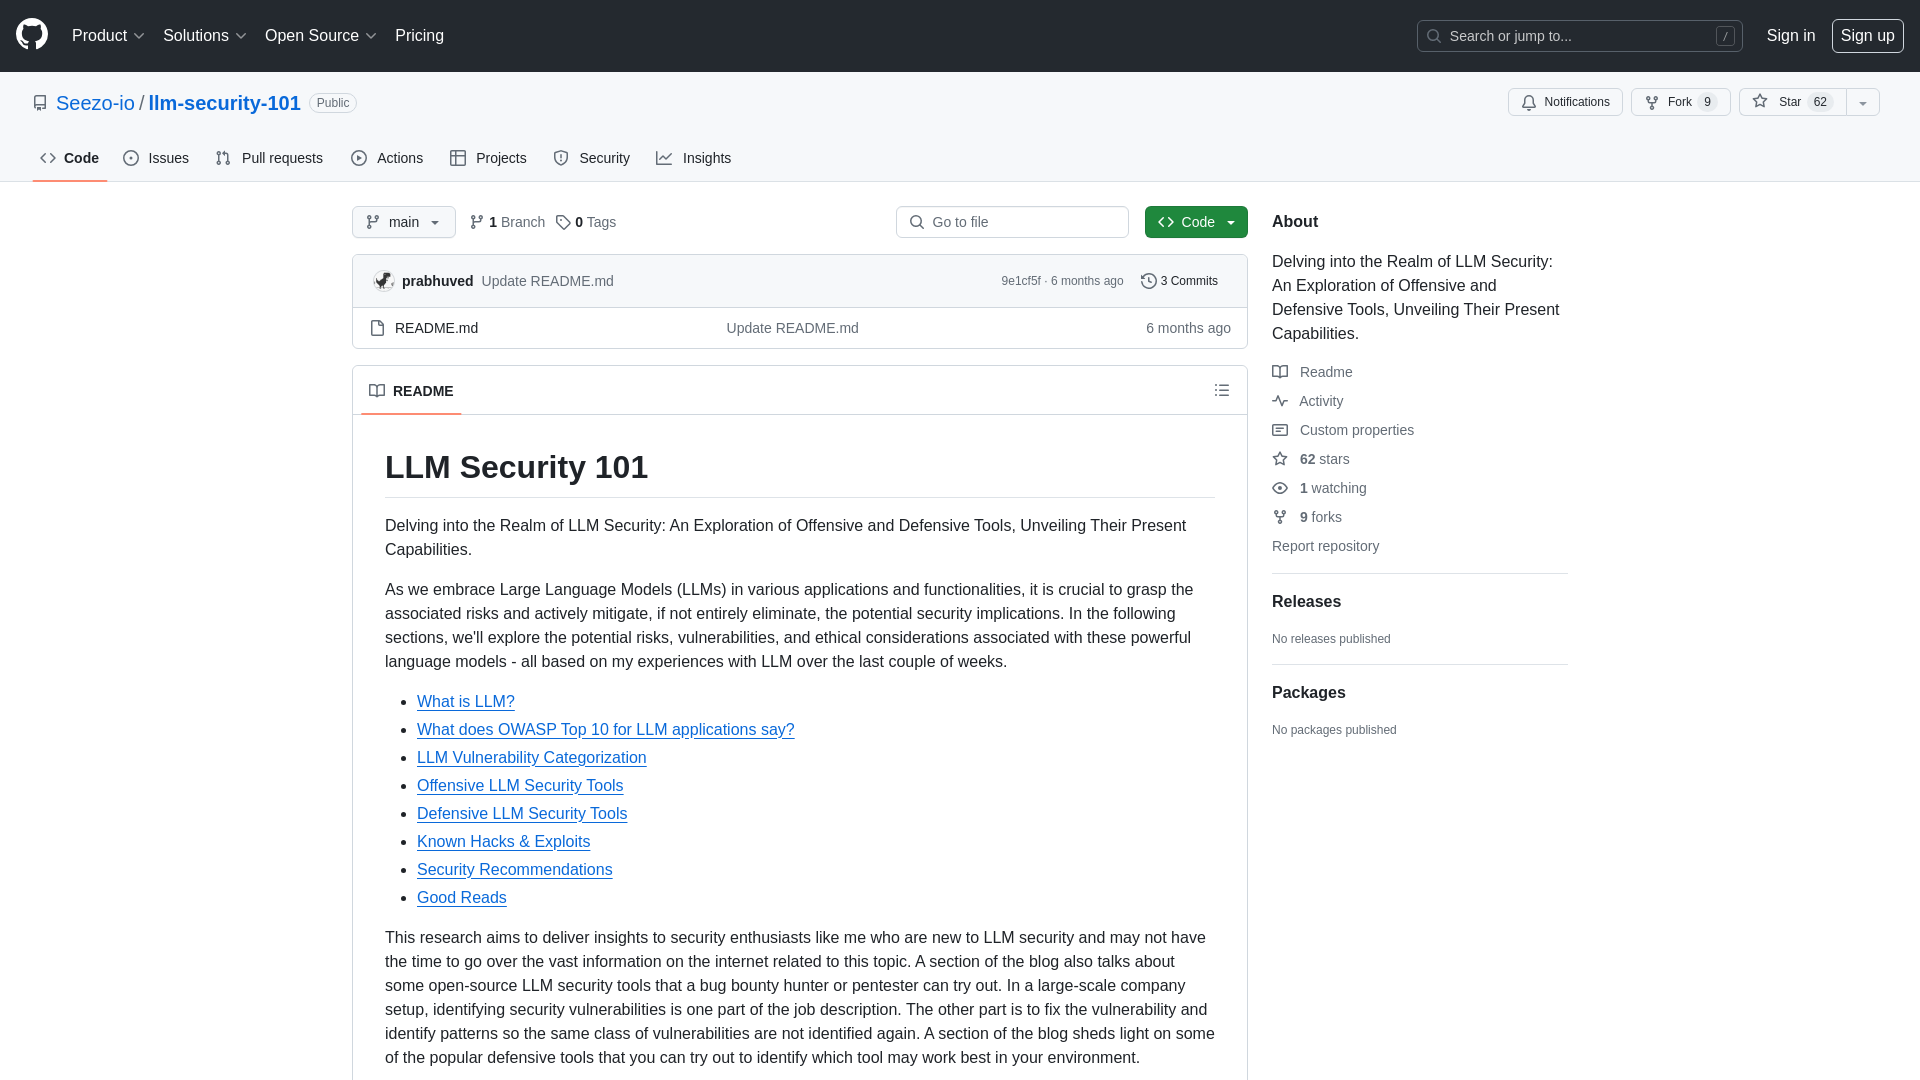 GitHub - Seezo-io/llm-security-101: Delving into the Realm of LLM Security: An Exploration of Offensive and Defensive Tools, Unveiling Their Present Capabilities.